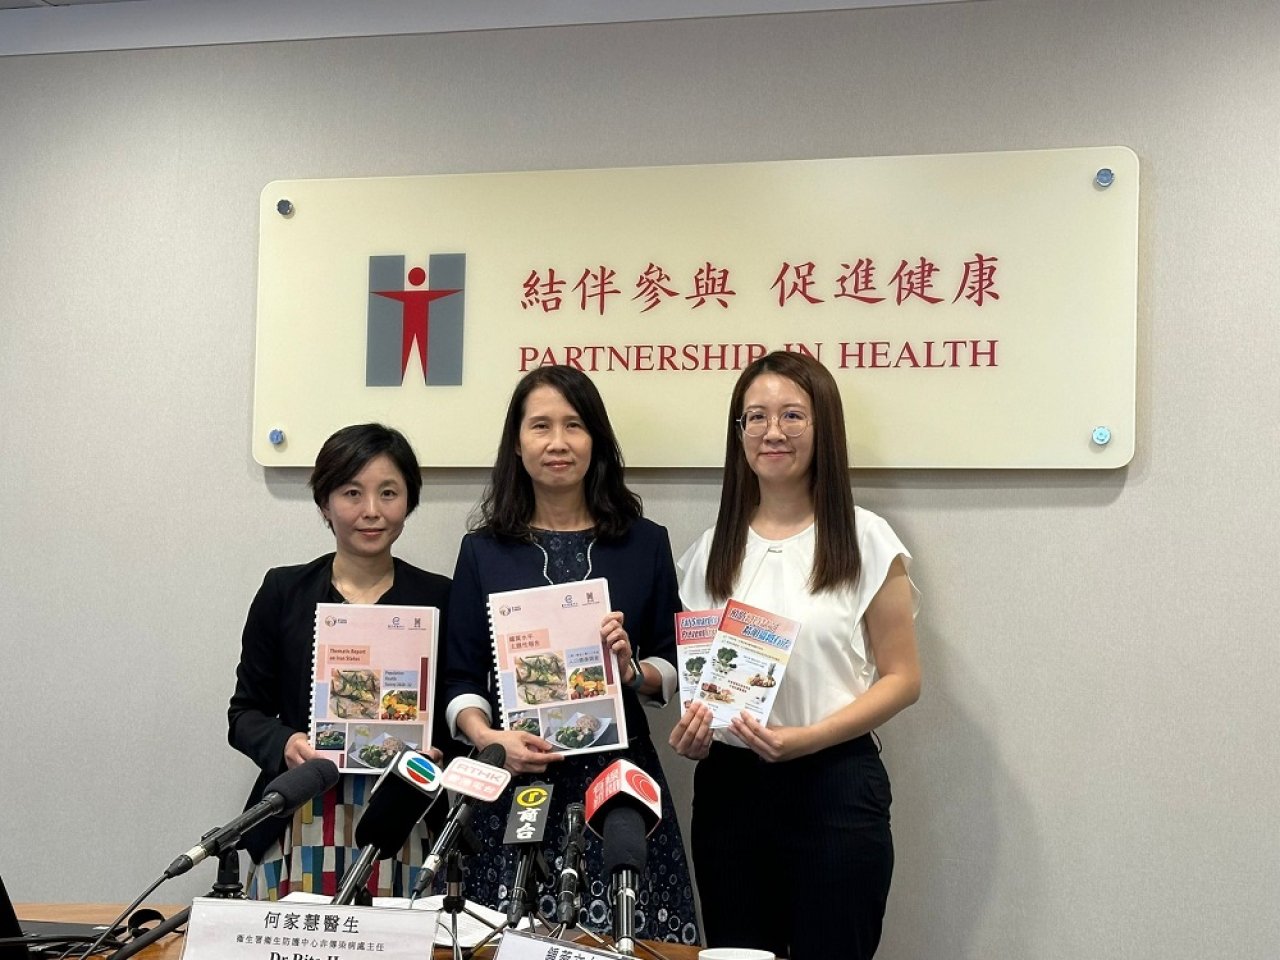 Almost six percent of Hongkongers have iron deficiency